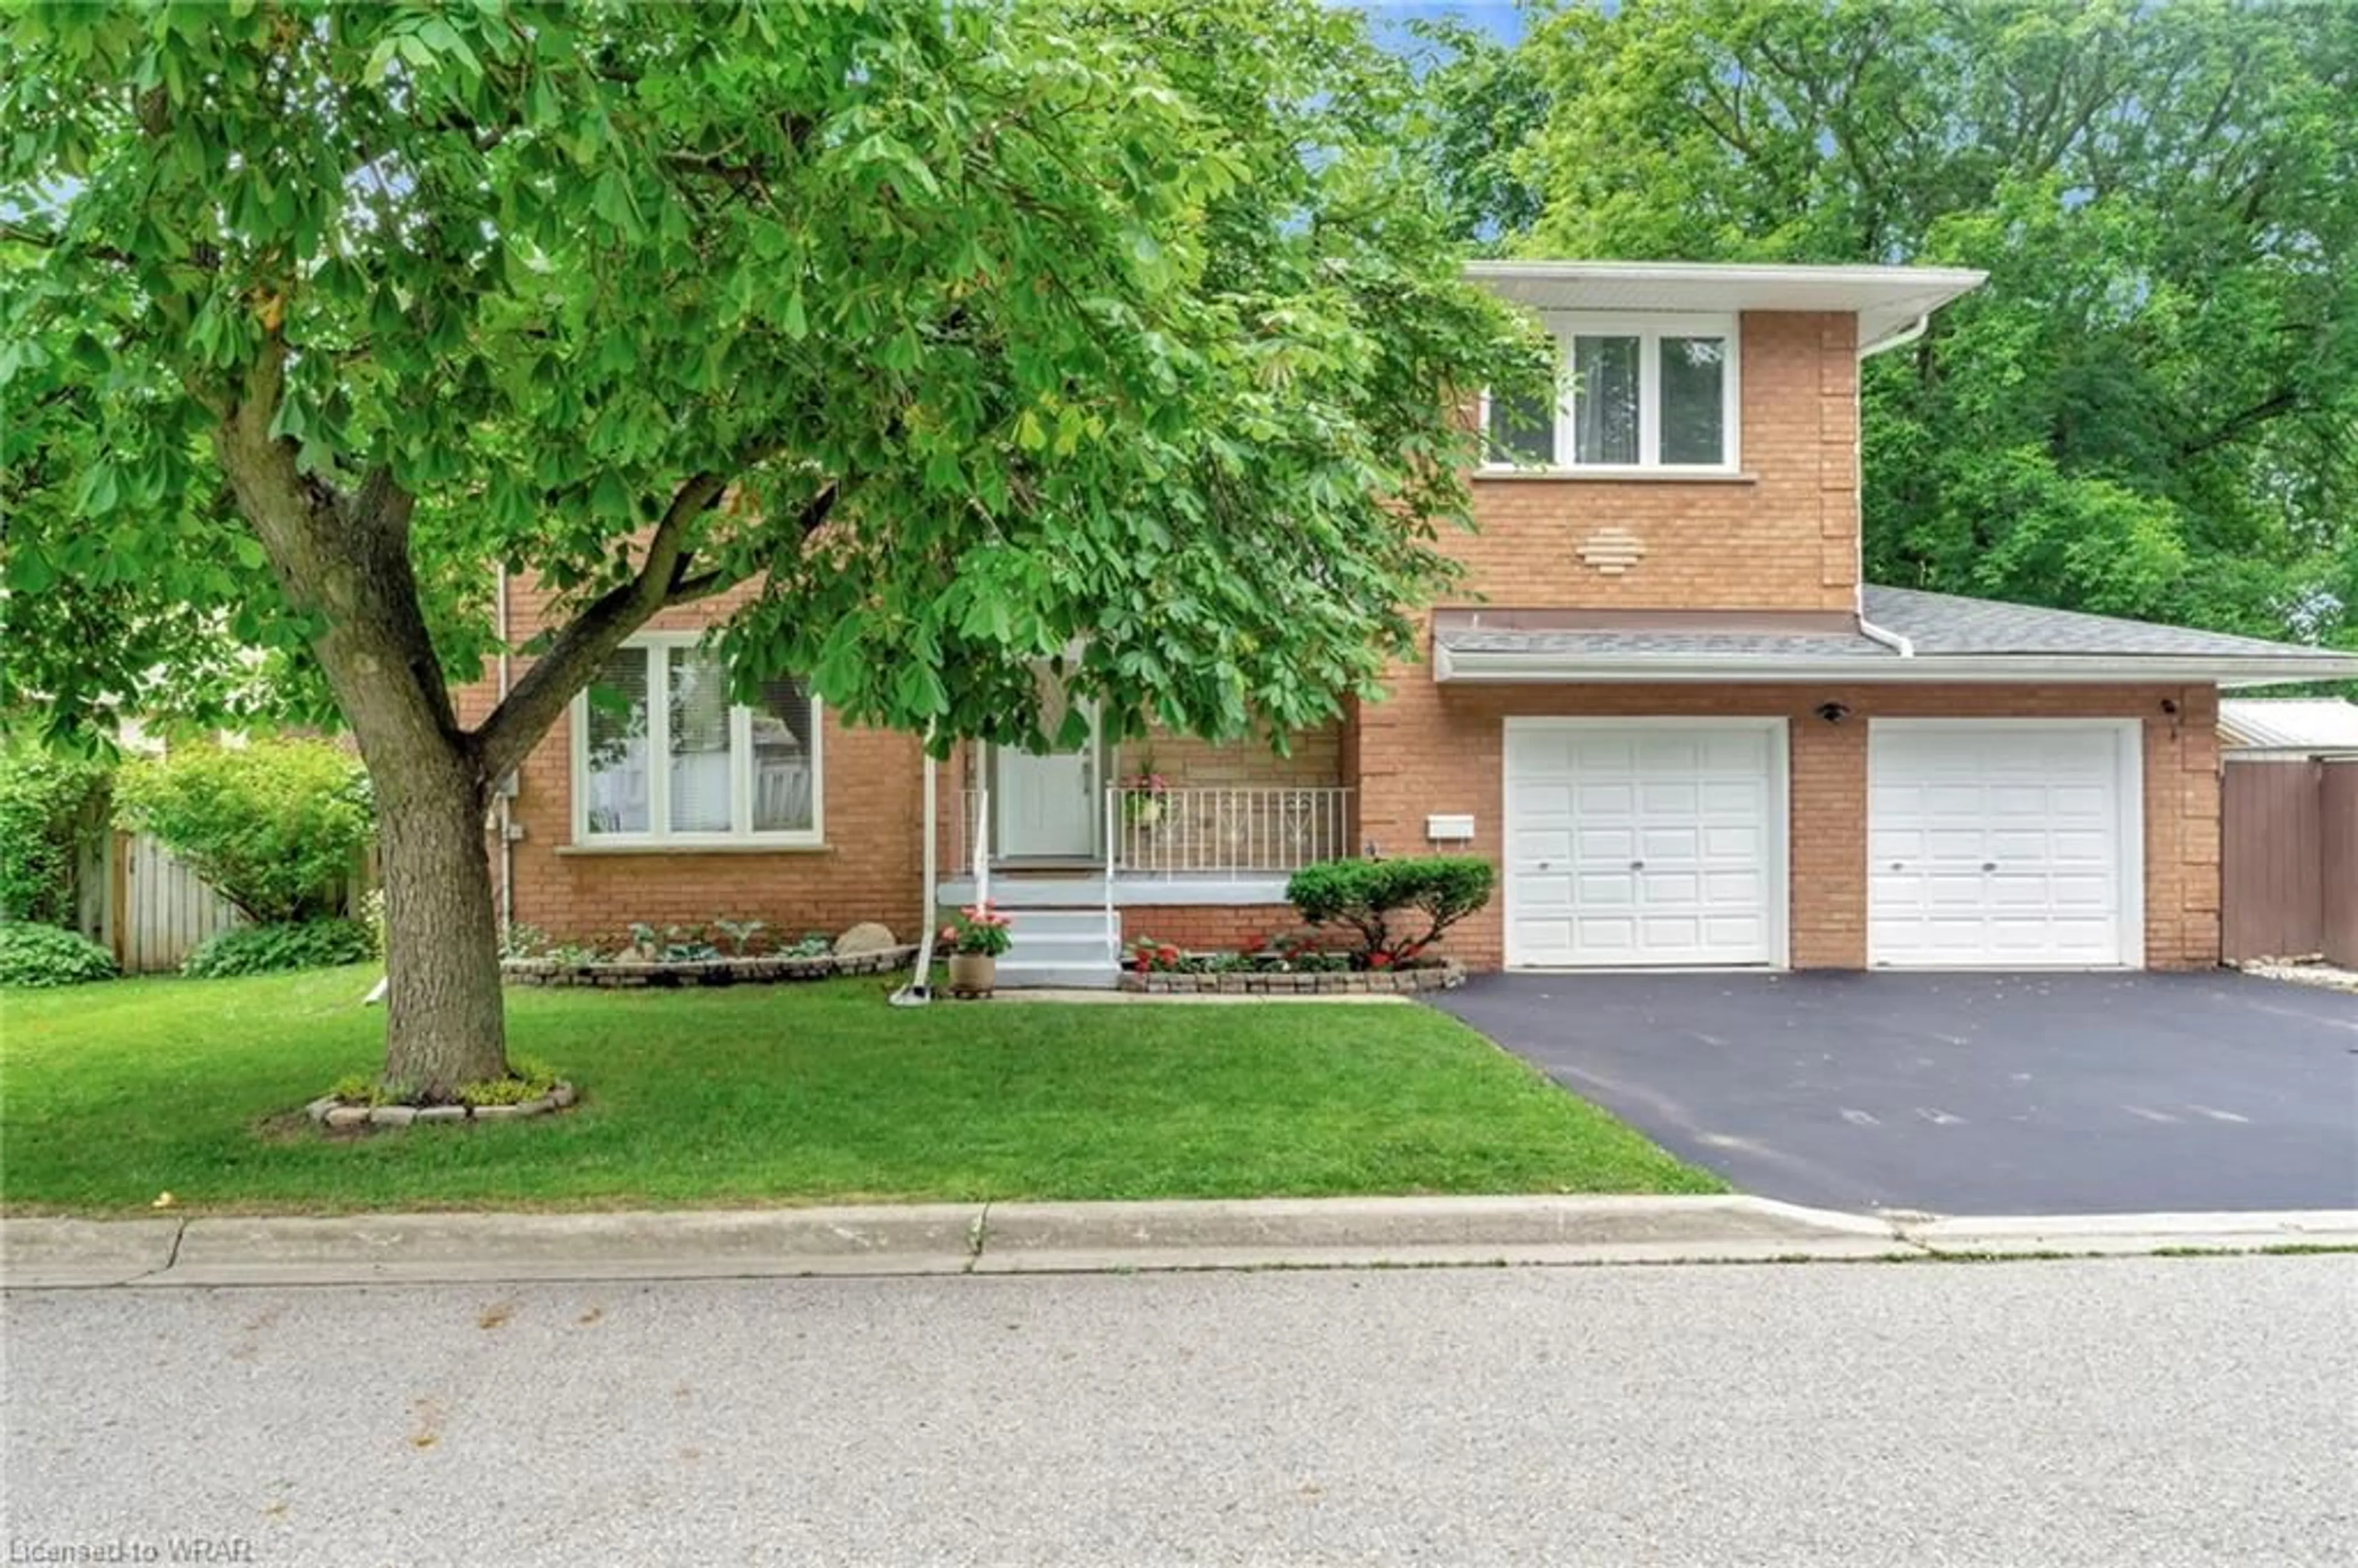 Home with brick exterior material for 139 Kitchener Rd, Cambridge Ontario N3H 5G2